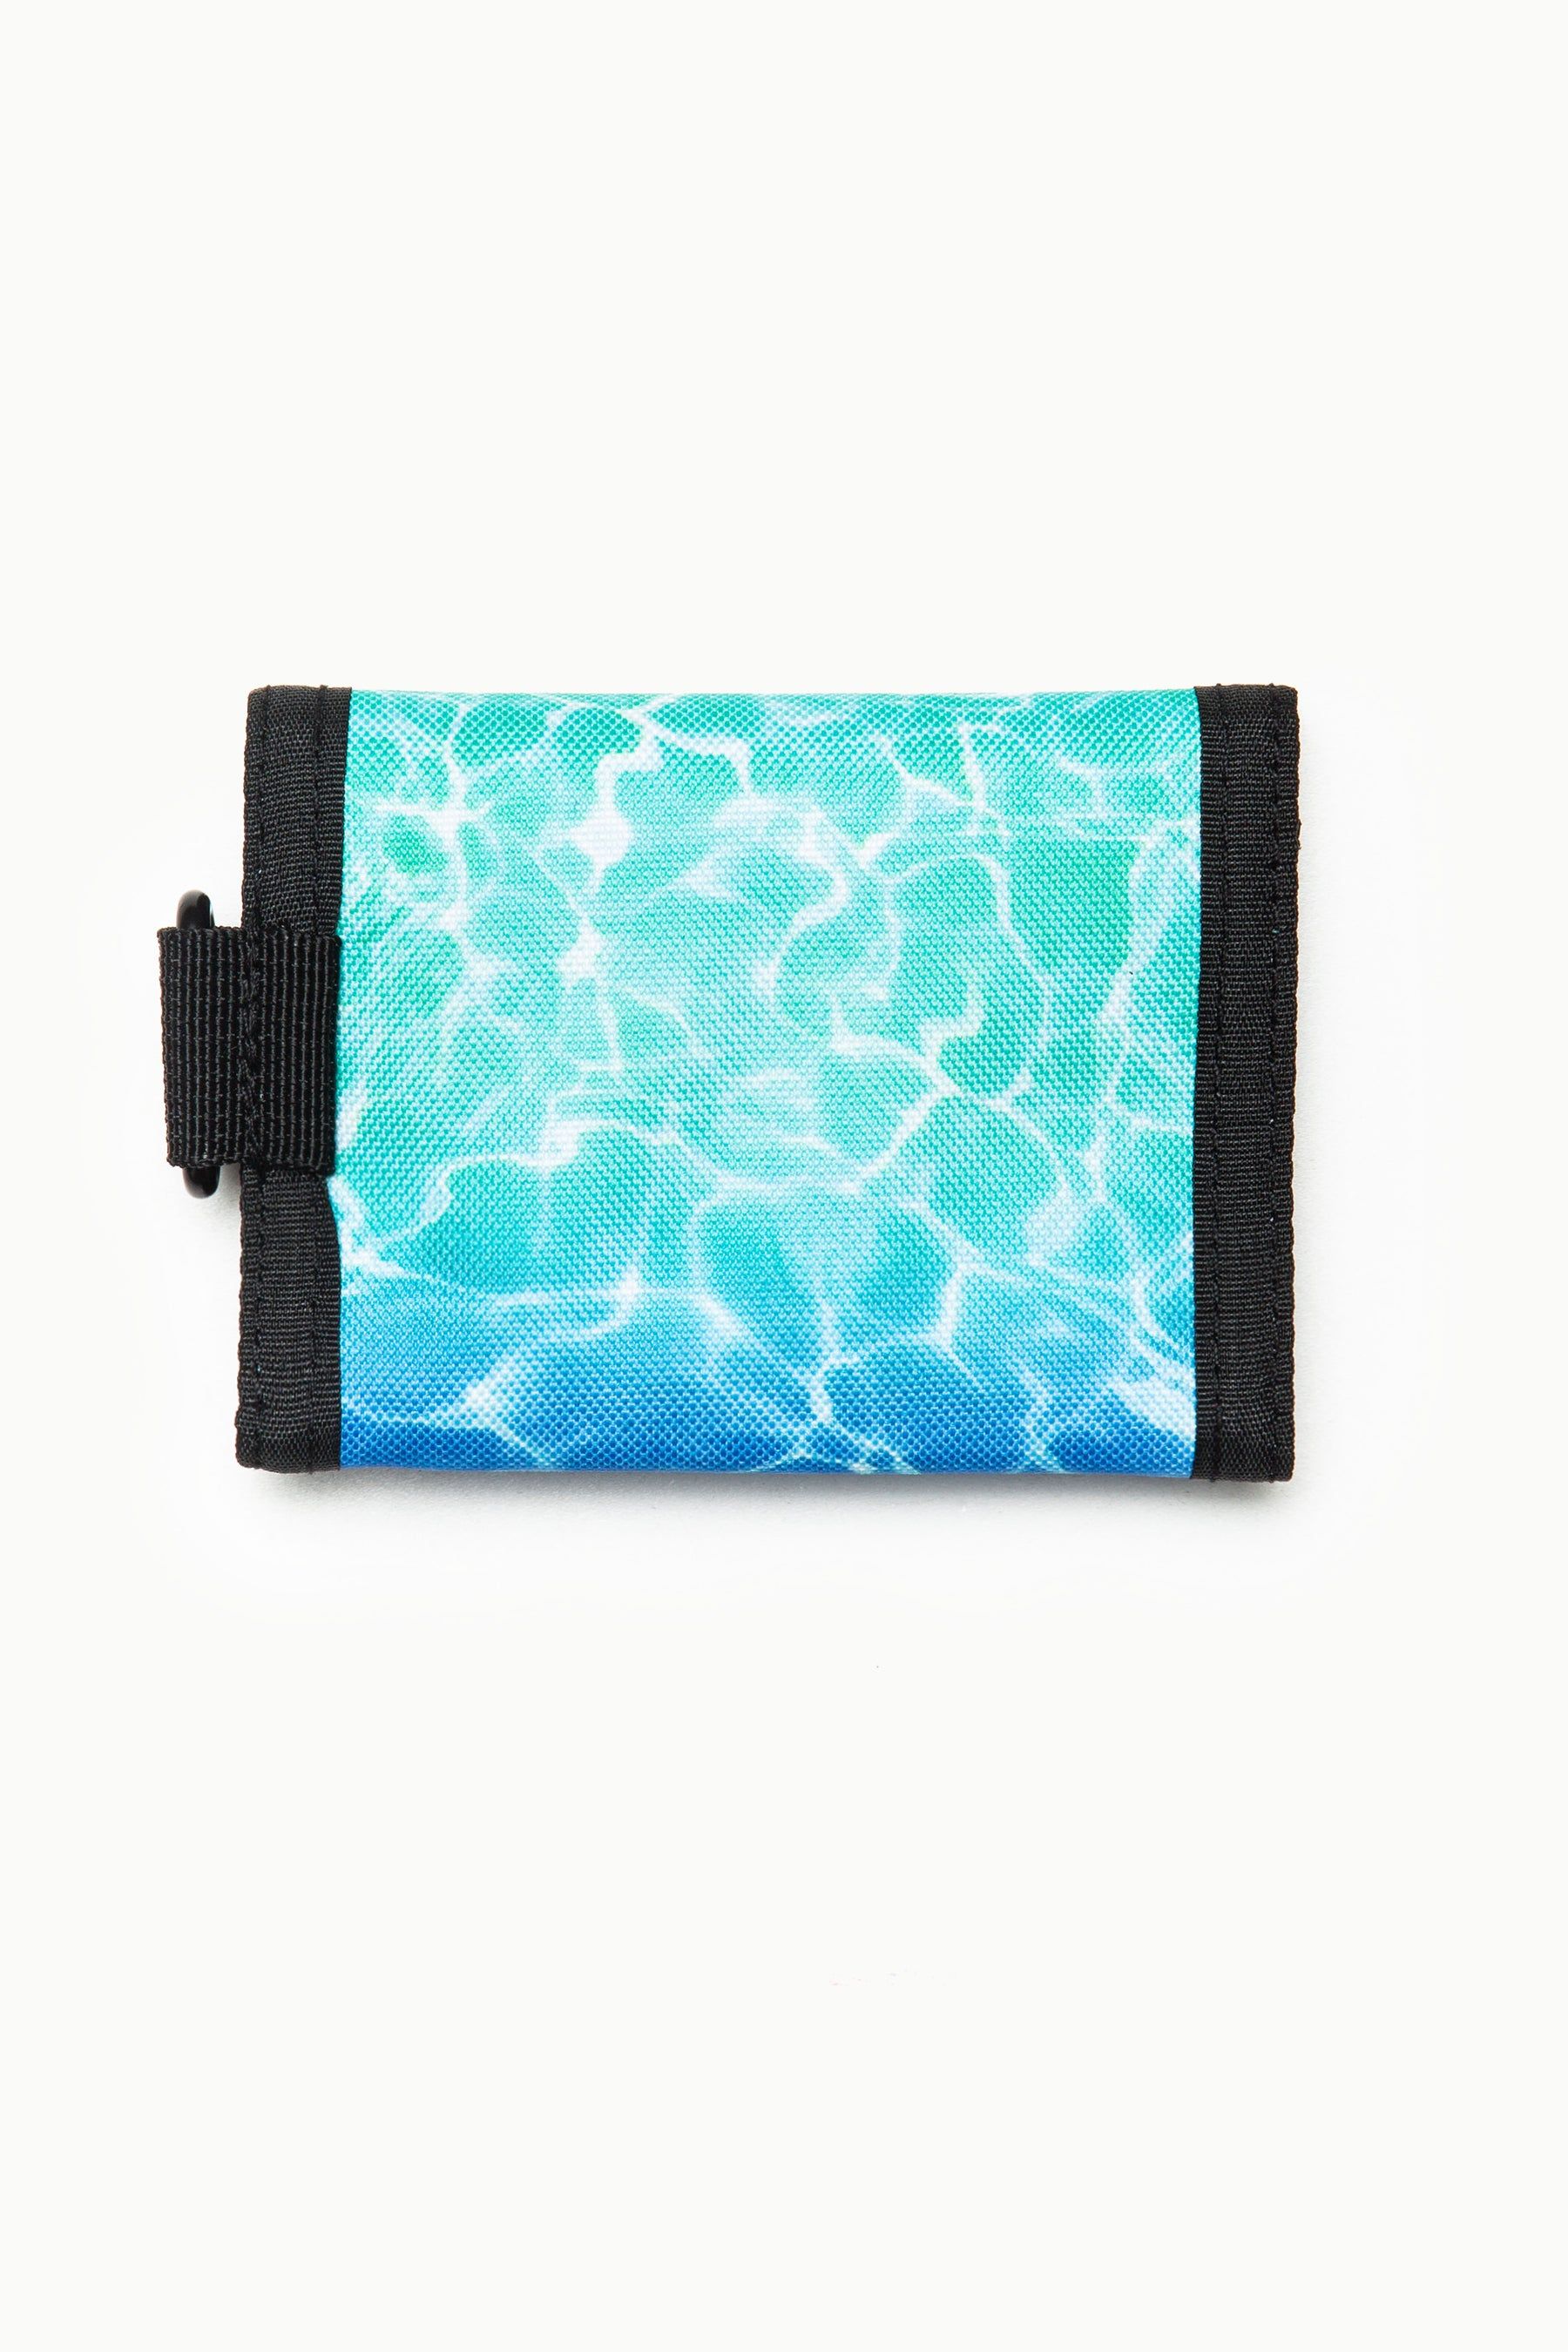 let us introduce you to the HYPE. Pool Fade Wallet. A unisex wallet shape and design, creating the perfect lightweight wallet you need as your money and card holder. Featuring an all-over swimming pool water inspired print in a green, turquoise and blue gradient fade colour palette. Finished with Velcro fastening and the iconic HYPE. crest logo in a raised rubber fabric. Wipe clean only.